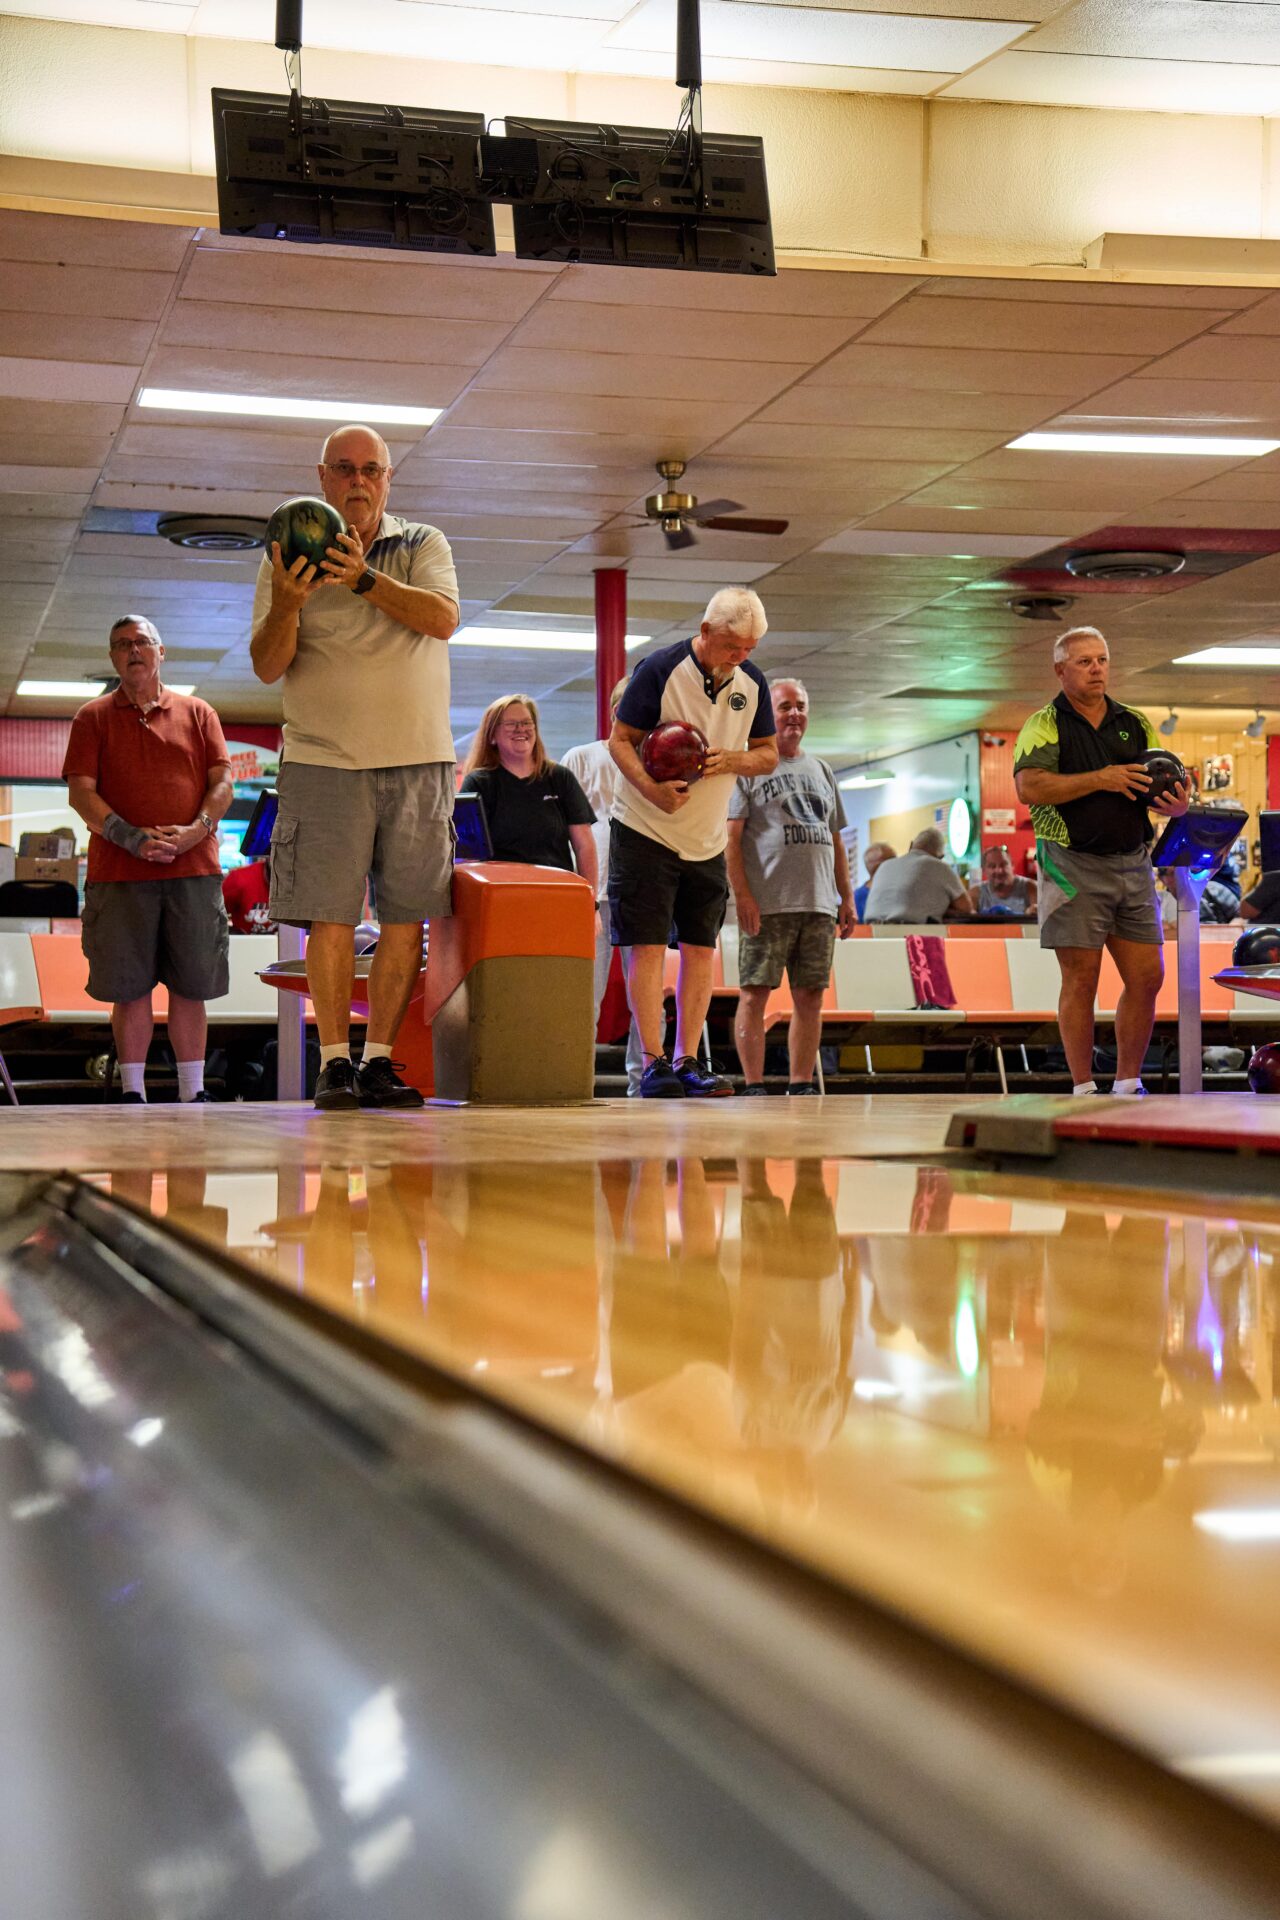 5 Ways to Spice Up Your Bowling League and Keep Things Fun